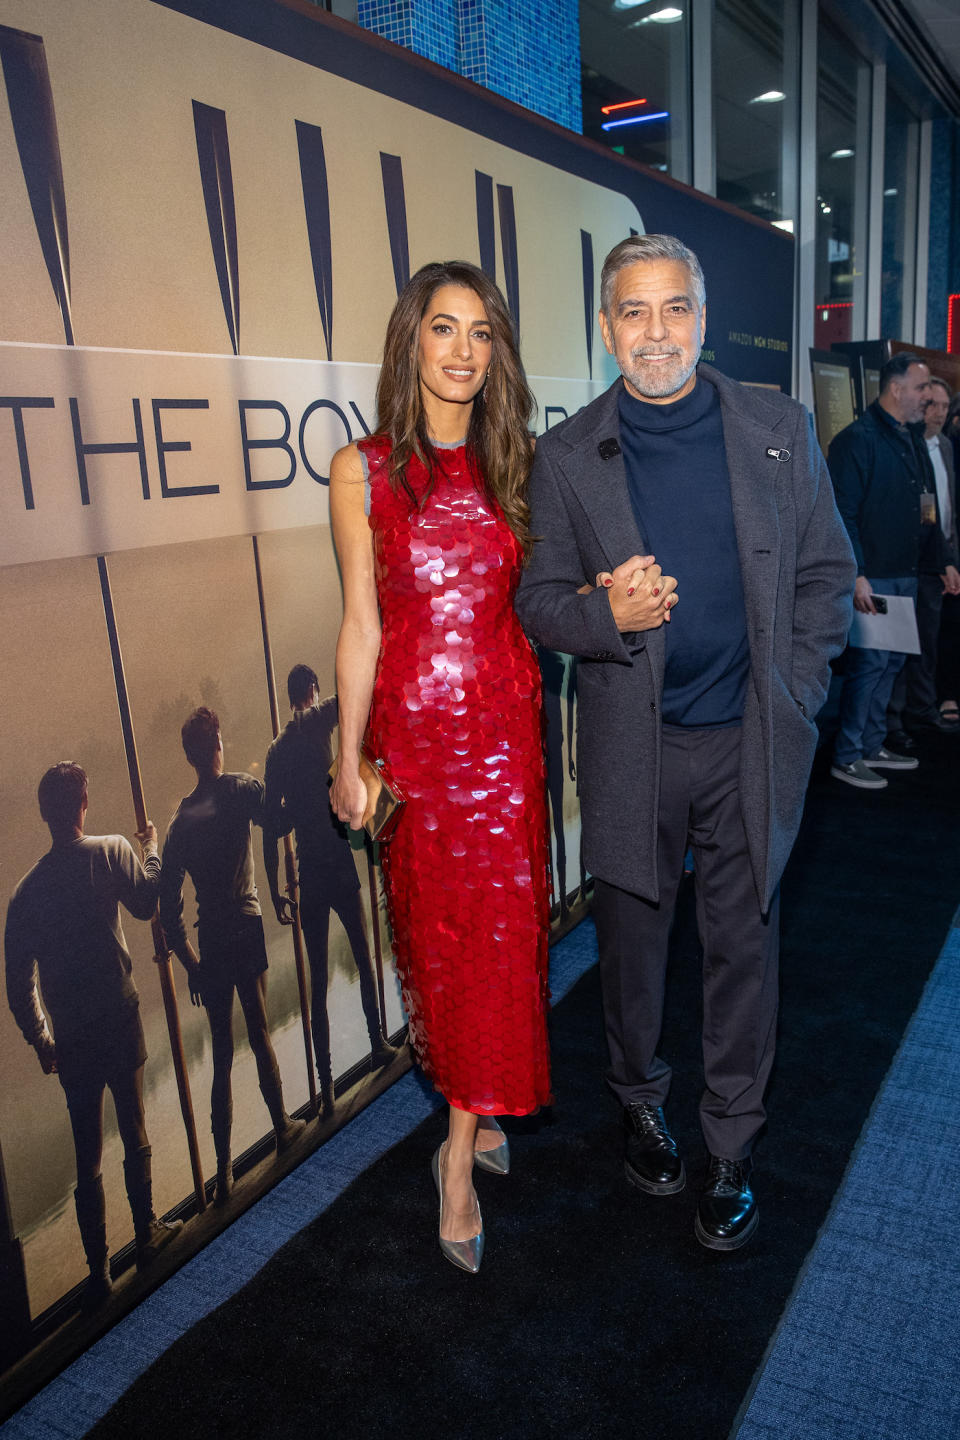 SEATTLE, WASHINGTON - DECEMBER 07: Amal Clooney (L) and George Clooney attend the MGM Seattle community screening of "The Boys In The Boat" at SIFF Cinema on December 07, 2023 in Seattle, Washington. (Photo by Mat Hayward/Getty Images for MGM's Seattle Community)